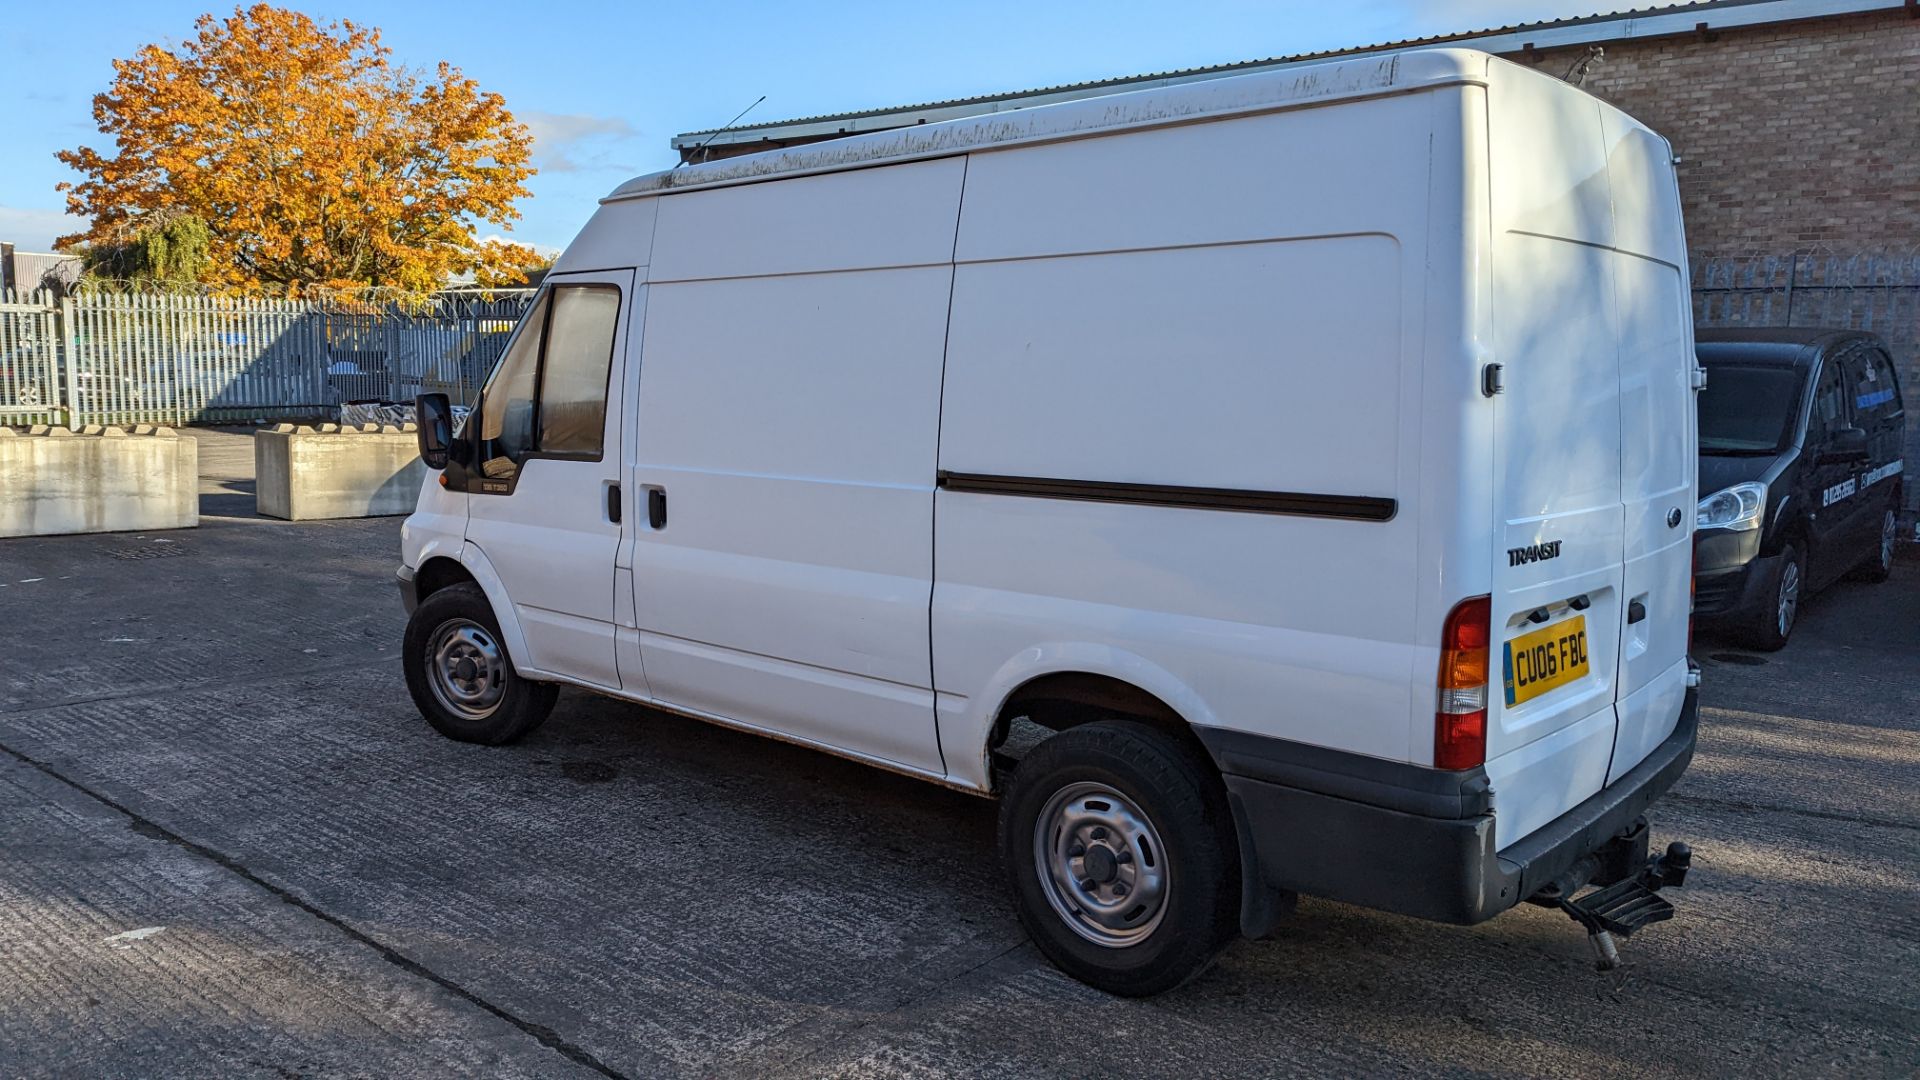 CU06 FBC Ford Transit panel van, 6 speed manual gearbox, 2402cc diesel engine. Colour: white. Fir - Image 16 of 44